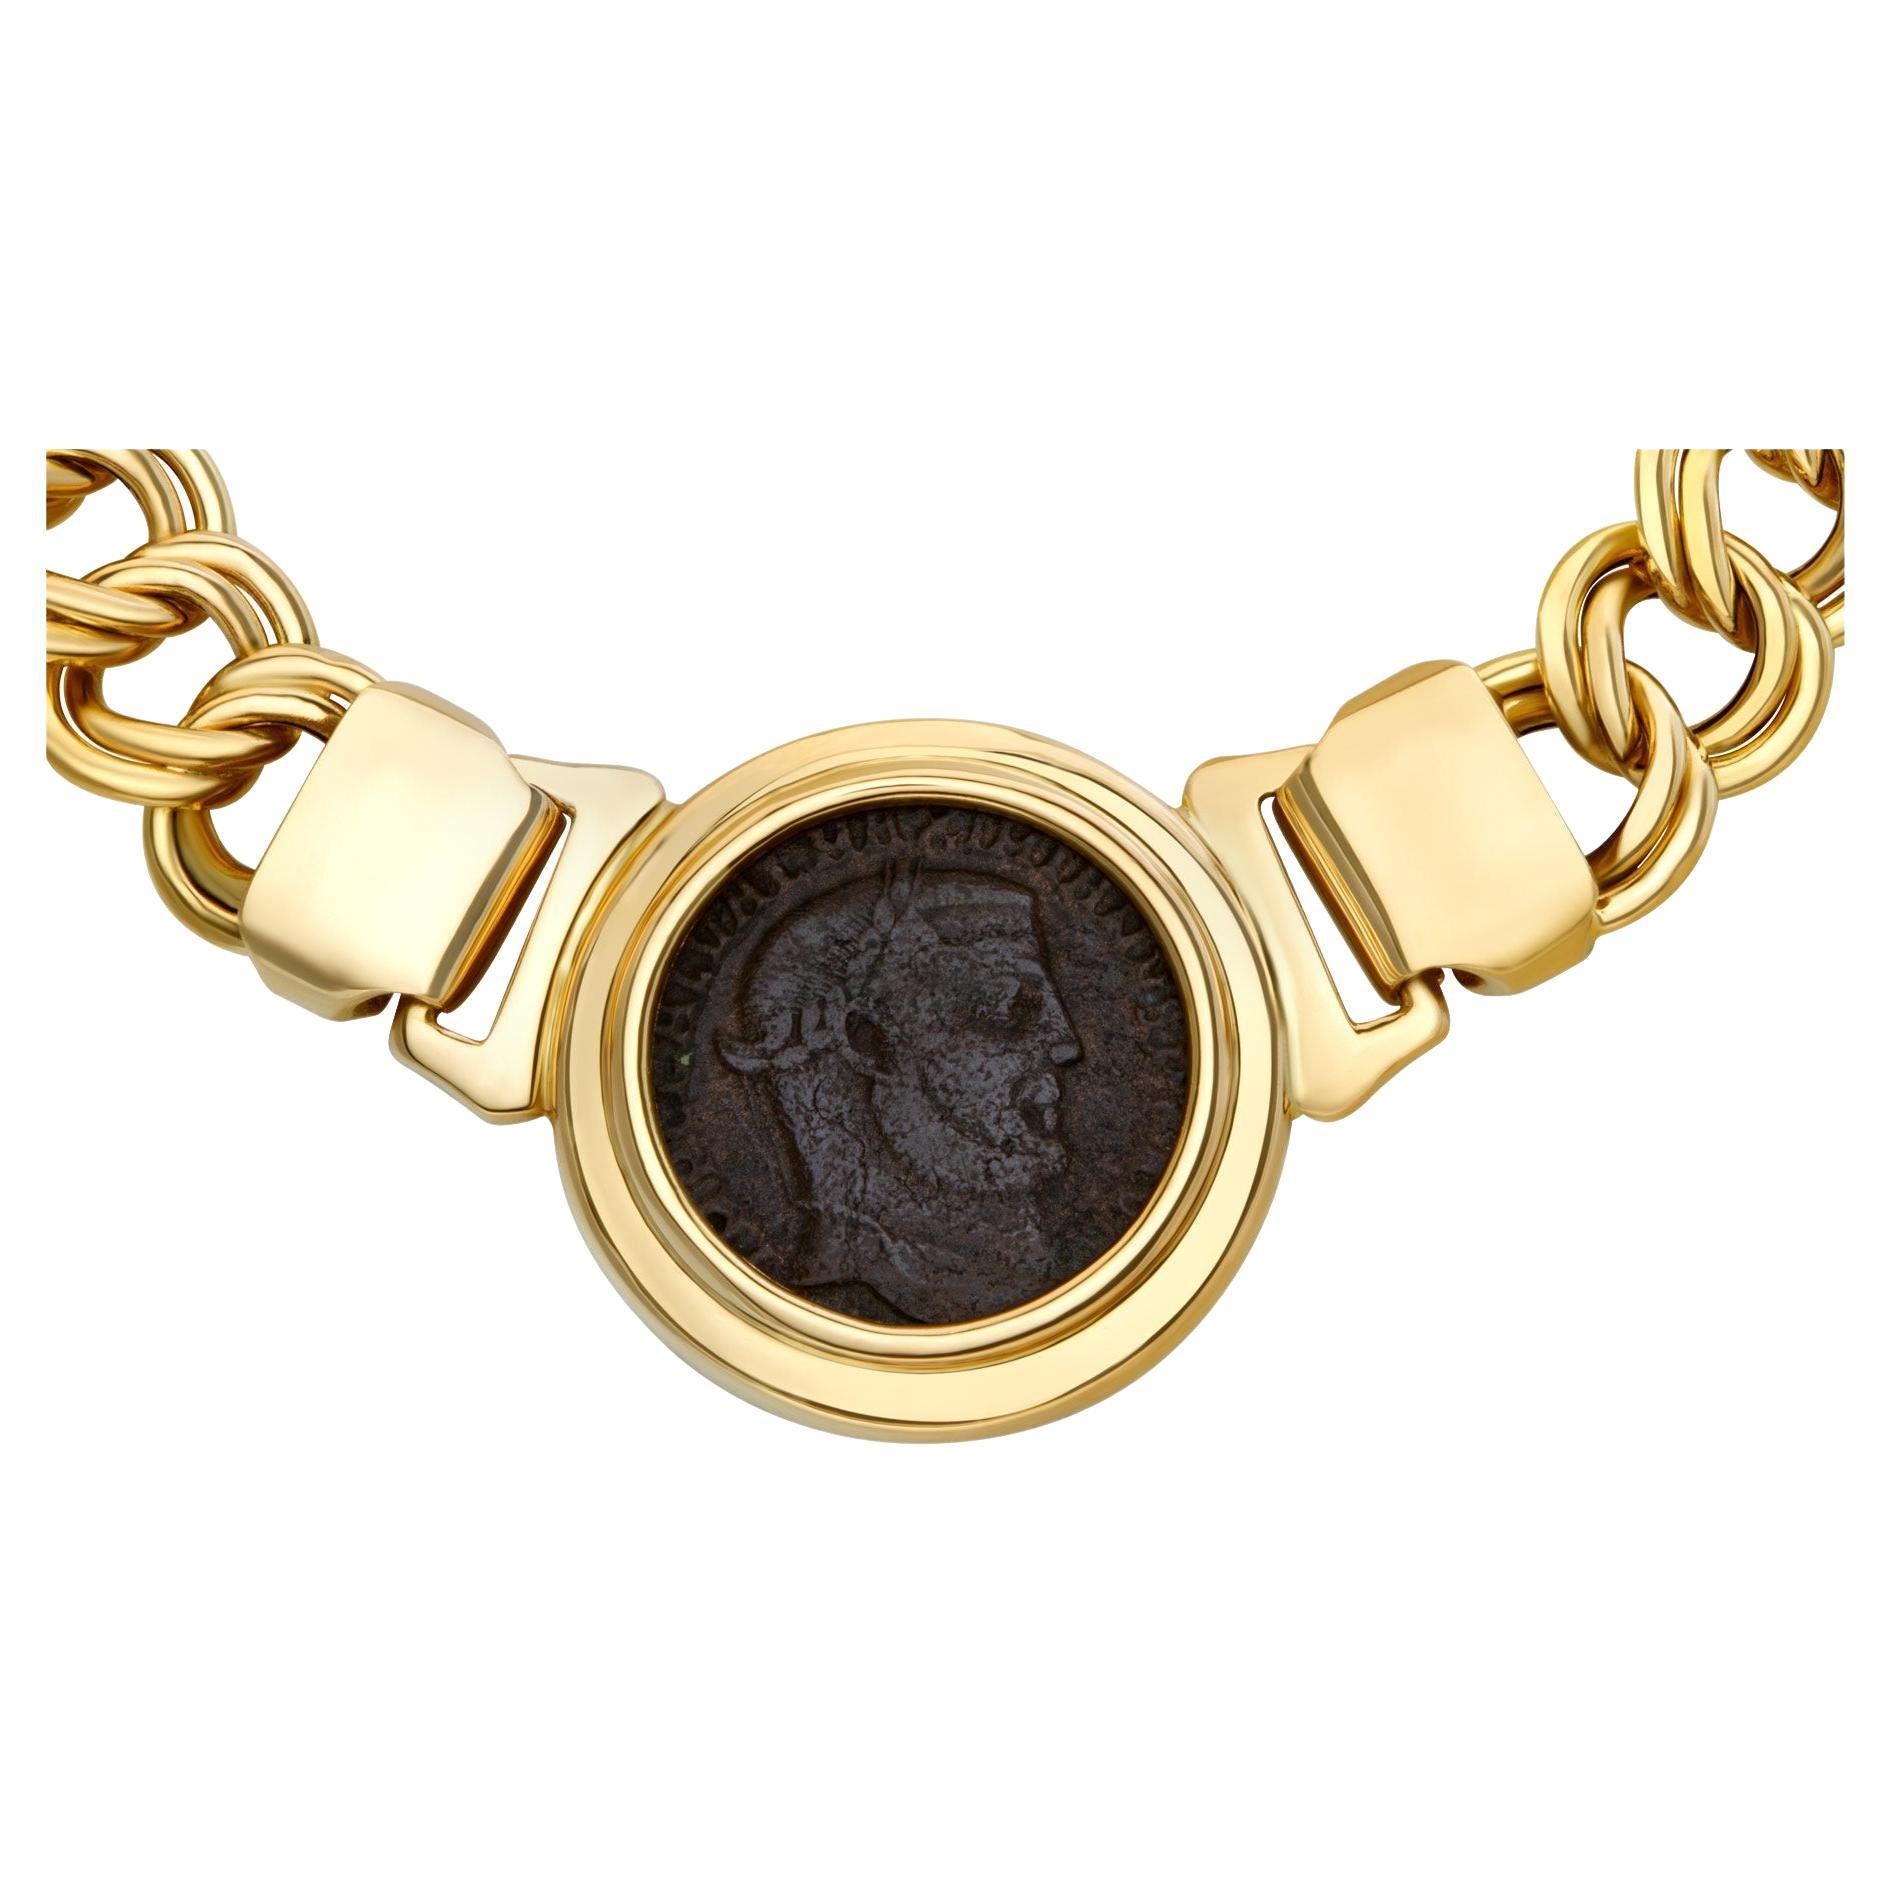 Ancient coin necklace on 18k chain